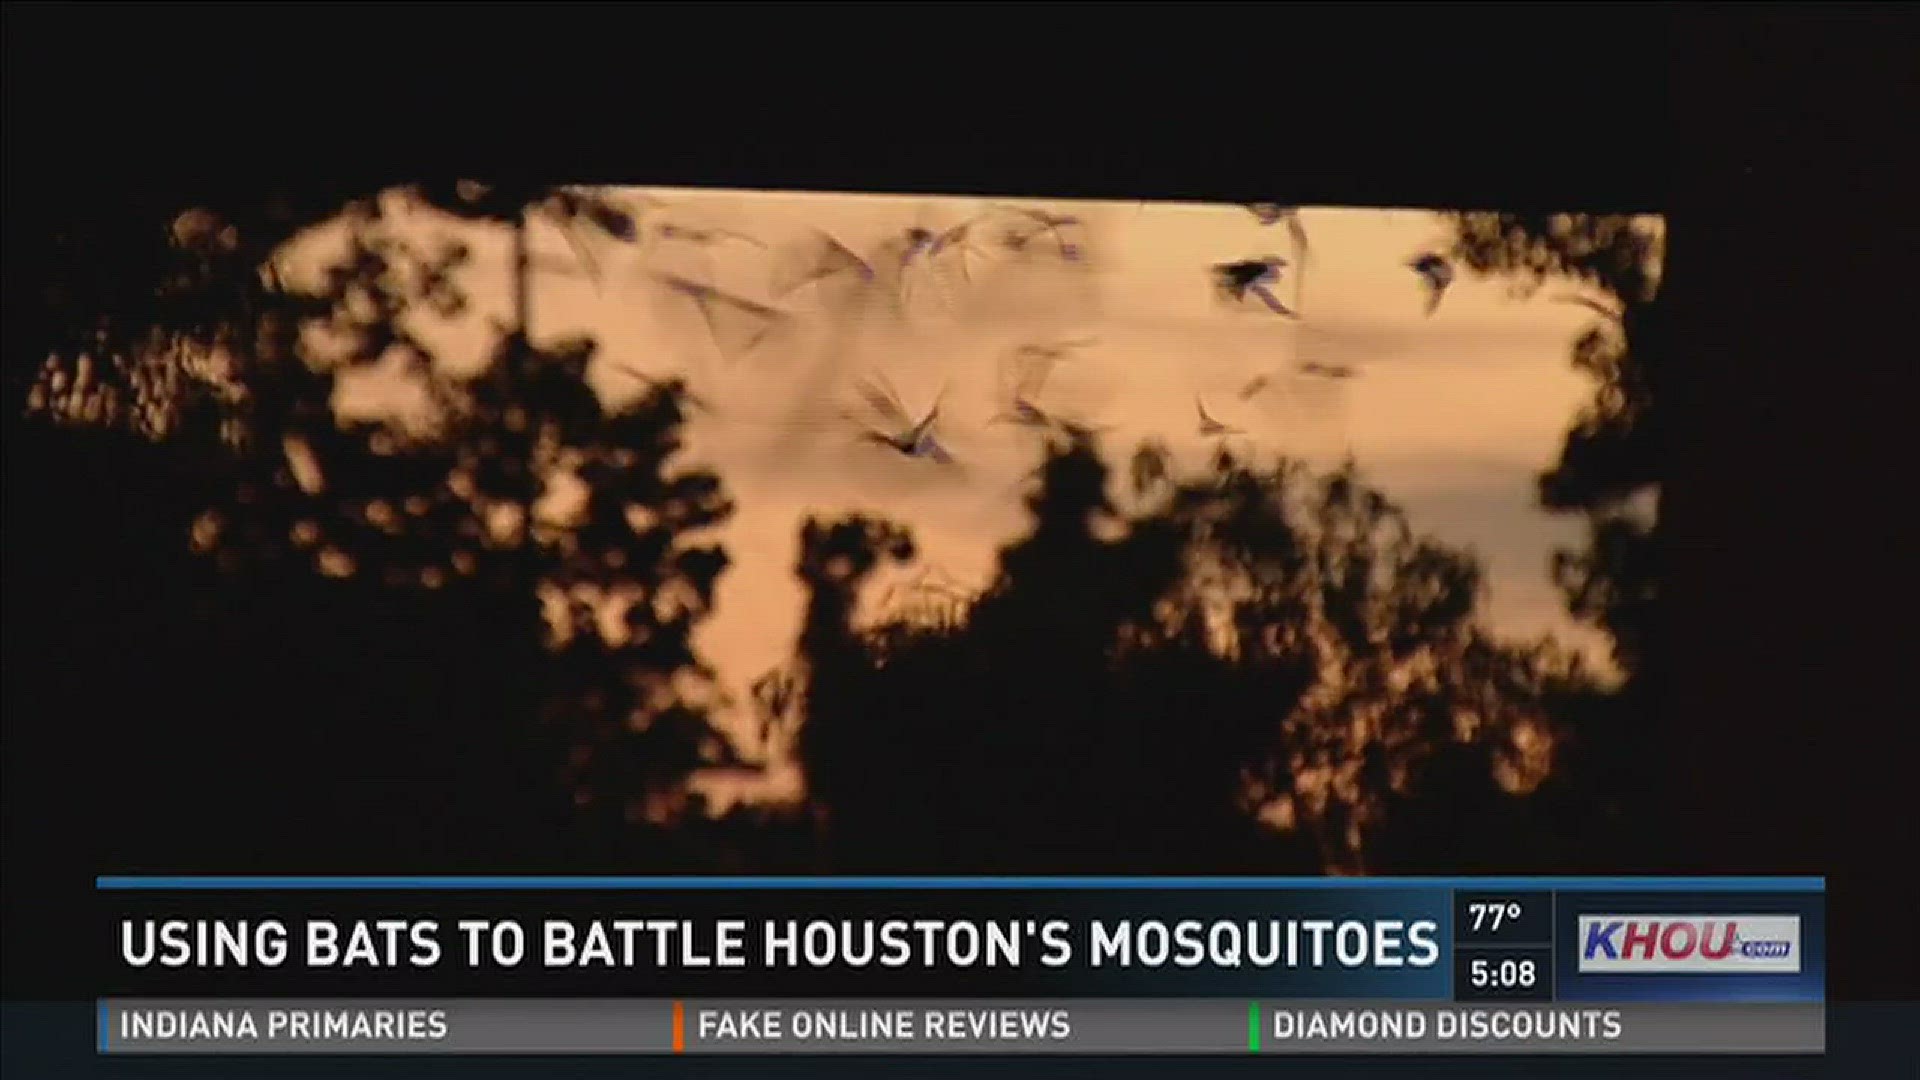 Bats could be the secret weapon in keeping Houston's mosquito problem under control. One bat can eat 1,000 mosquitoes a night.